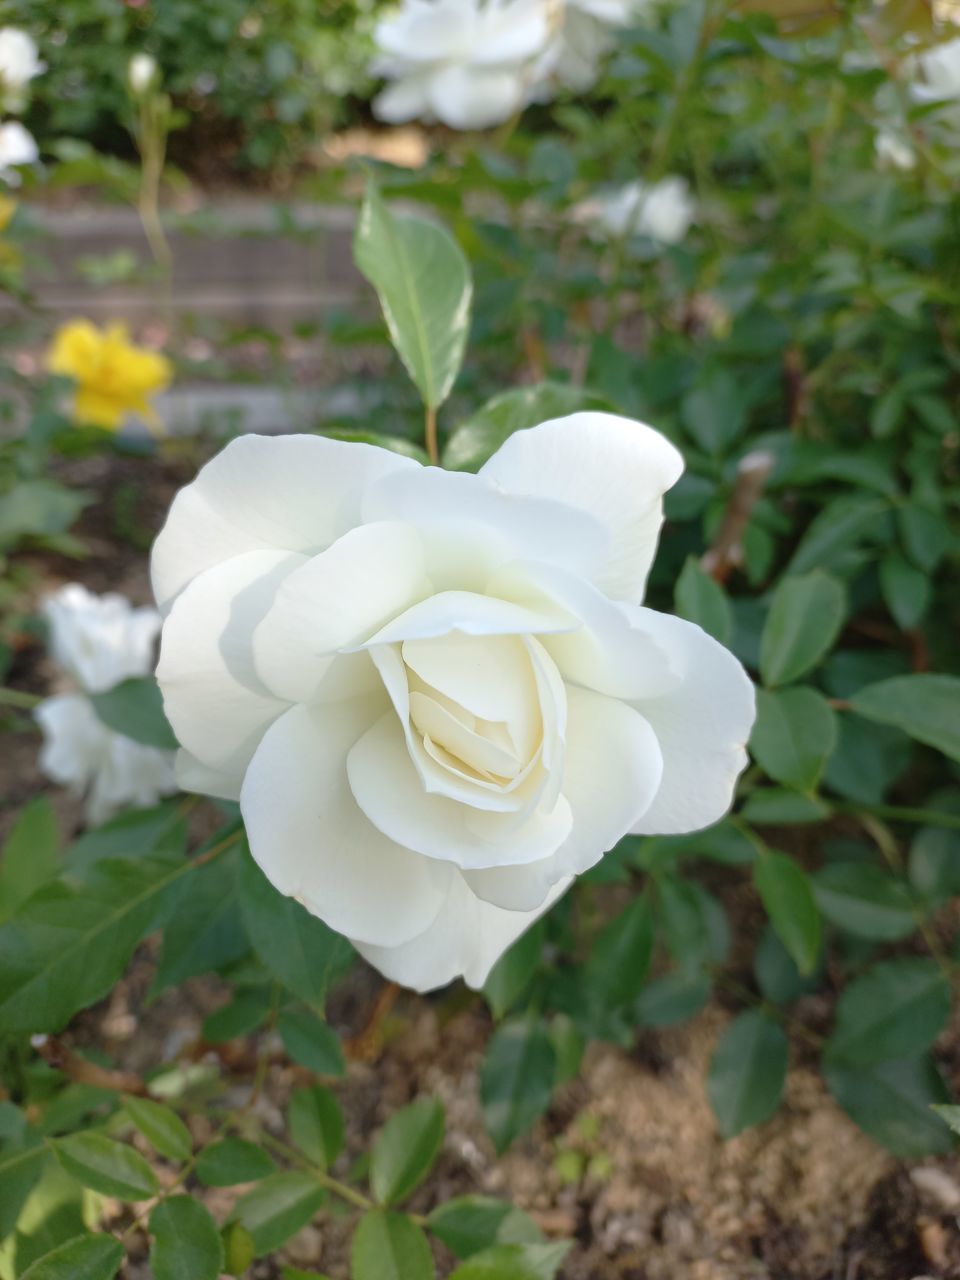 flower, plant, flowering plant, beauty in nature, petal, rose, white, freshness, flower head, inflorescence, nature, close-up, leaf, plant part, fragility, garden roses, growth, gardenia, no people, focus on foreground, outdoors, day, springtime, burnet rose, botany